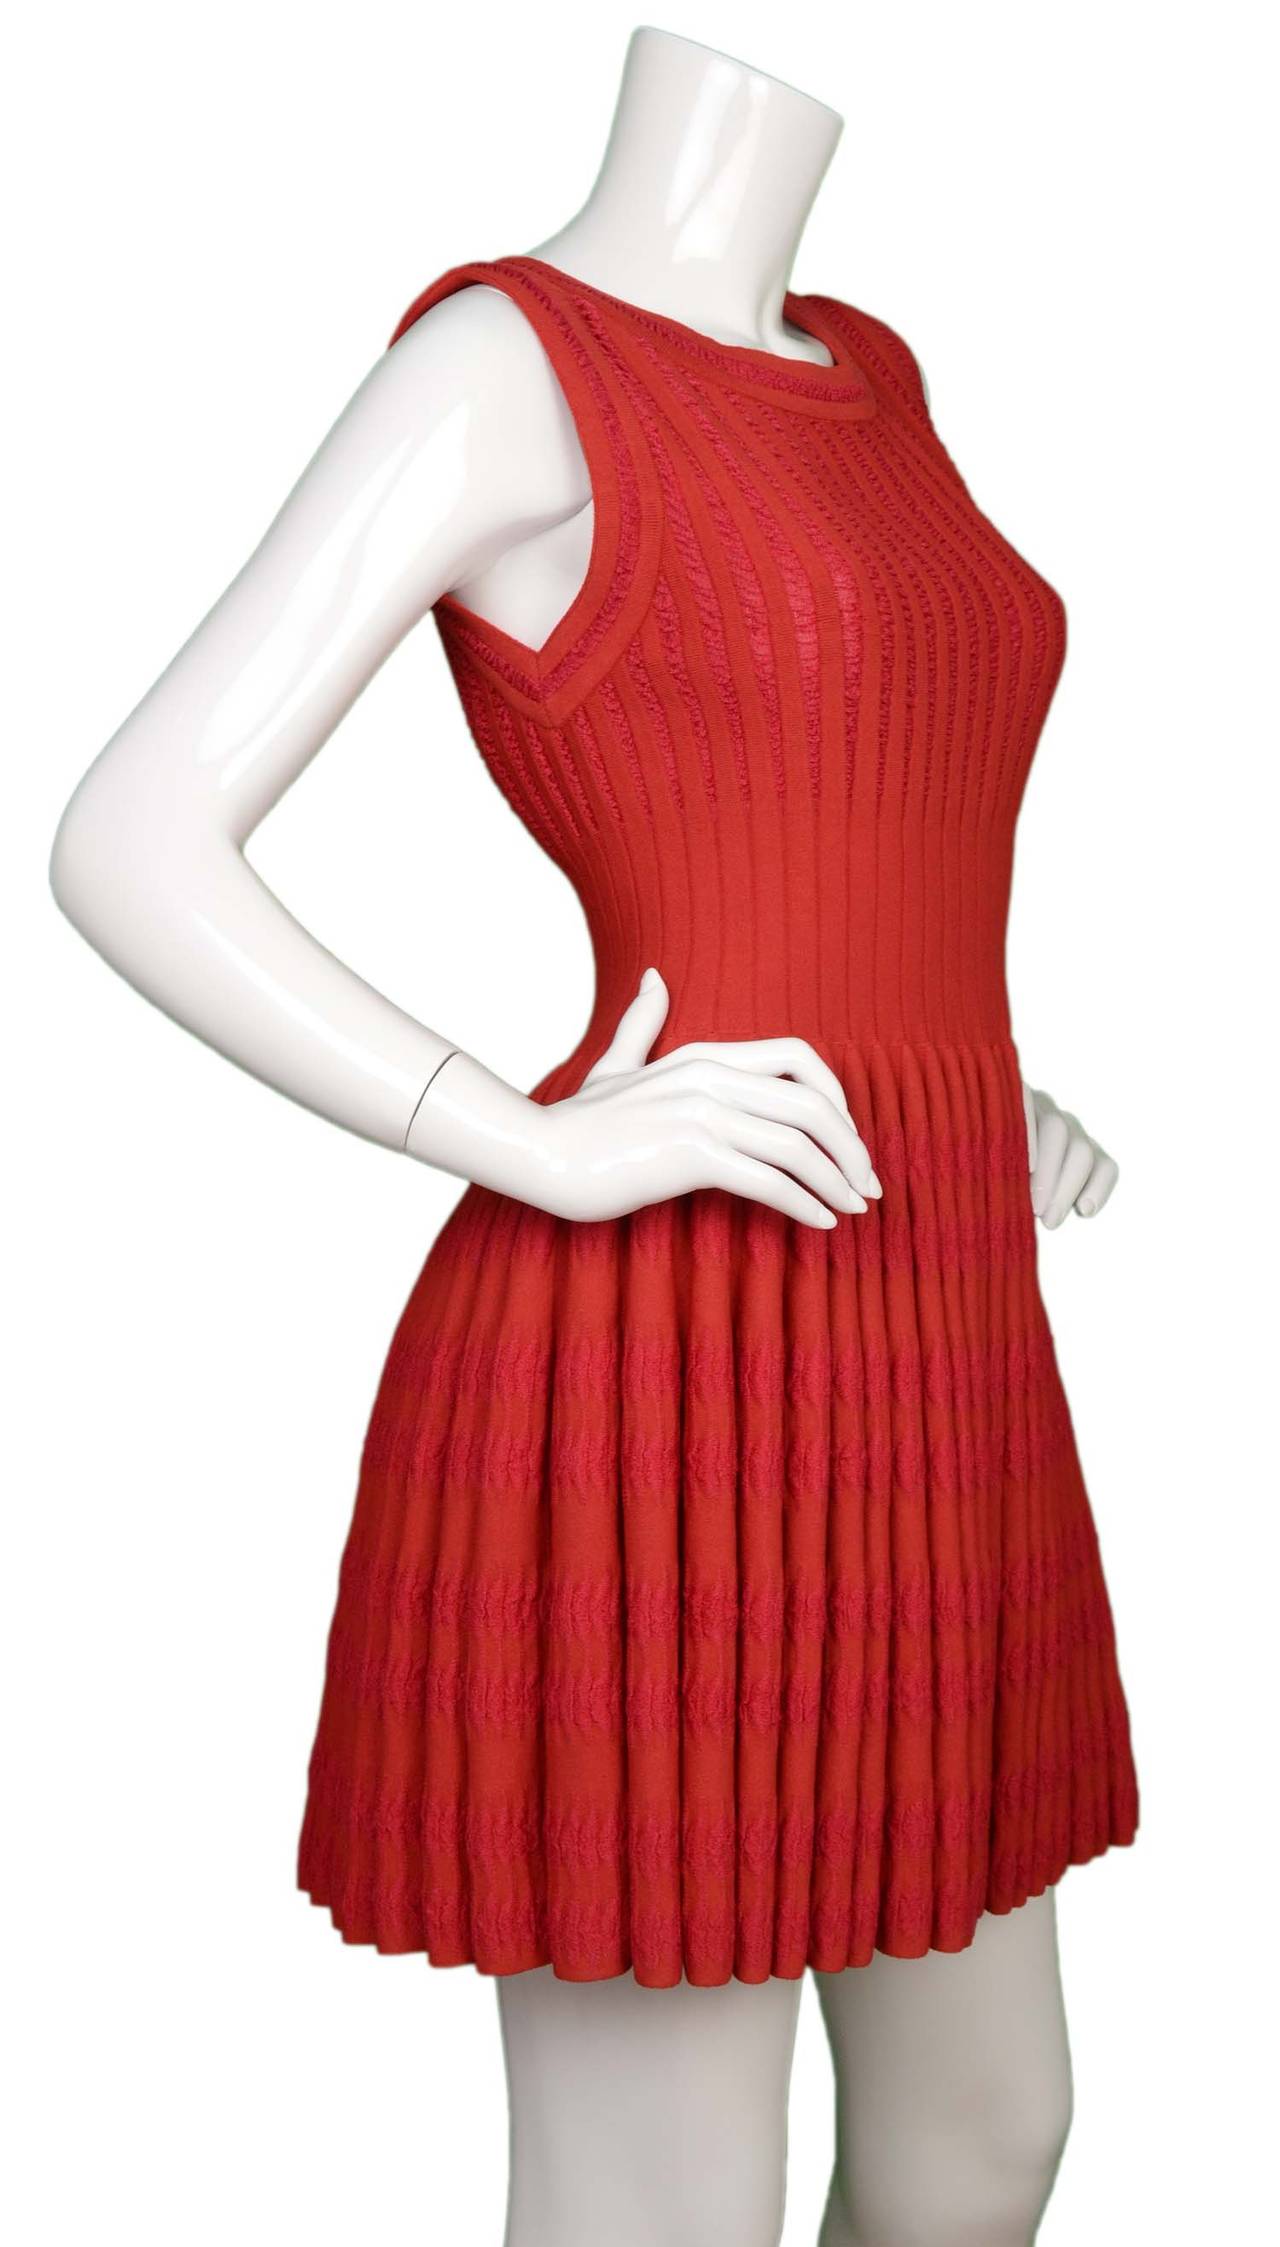 Alaia Red Sleeveless Fit & Flare Dress Features textured effect throughout bust and flare

    Made in: Italy
    Color: Red
    Composition: 50% viscose, 20% silk, 15% polyester, 12% nylon, 3% elastane
    Lining: None
    Closure/opening: Back